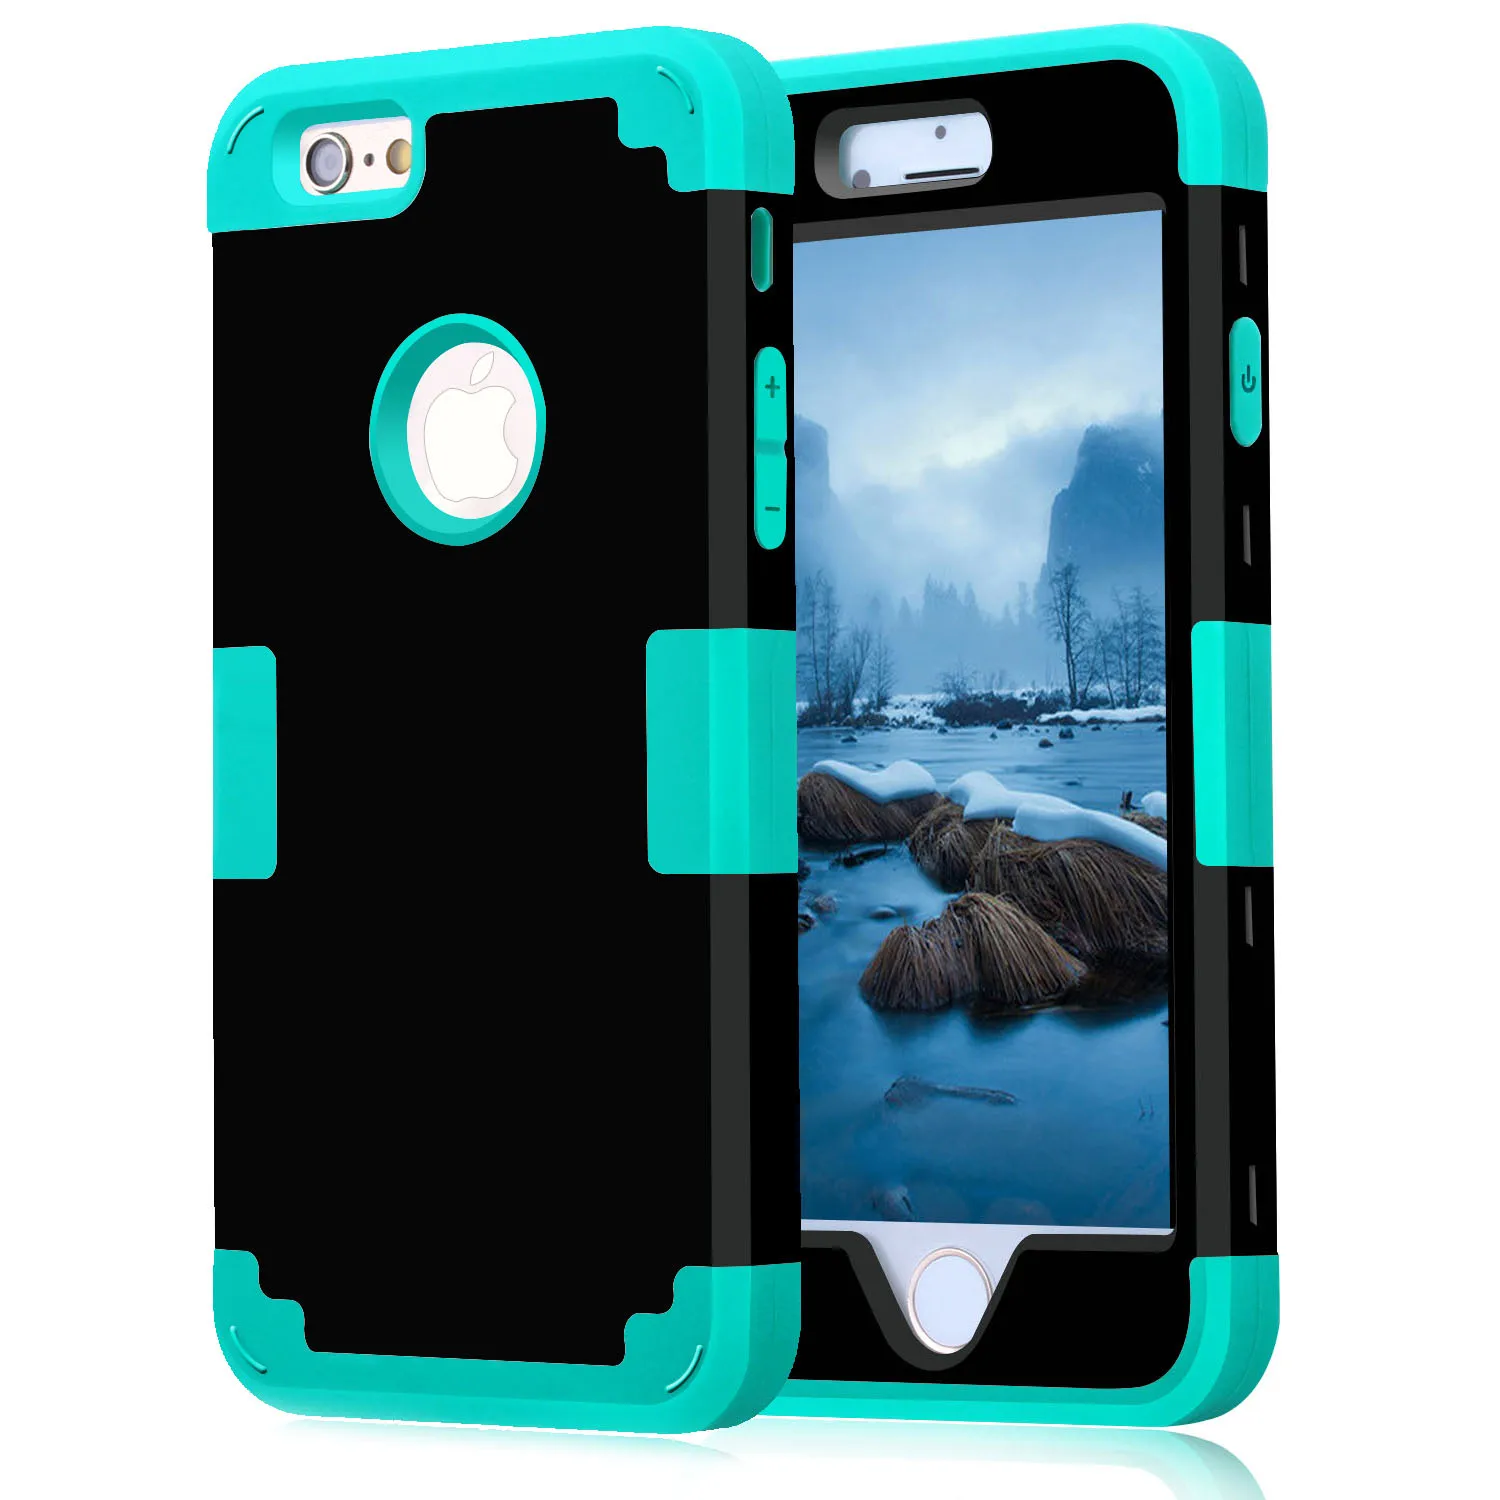 

For Apple iPhone 6 6s Case Shockproof Protect Hybrid Hard Rubber Impact Armor Phone Cases For iPhone 5//5S/5C/SE Cover